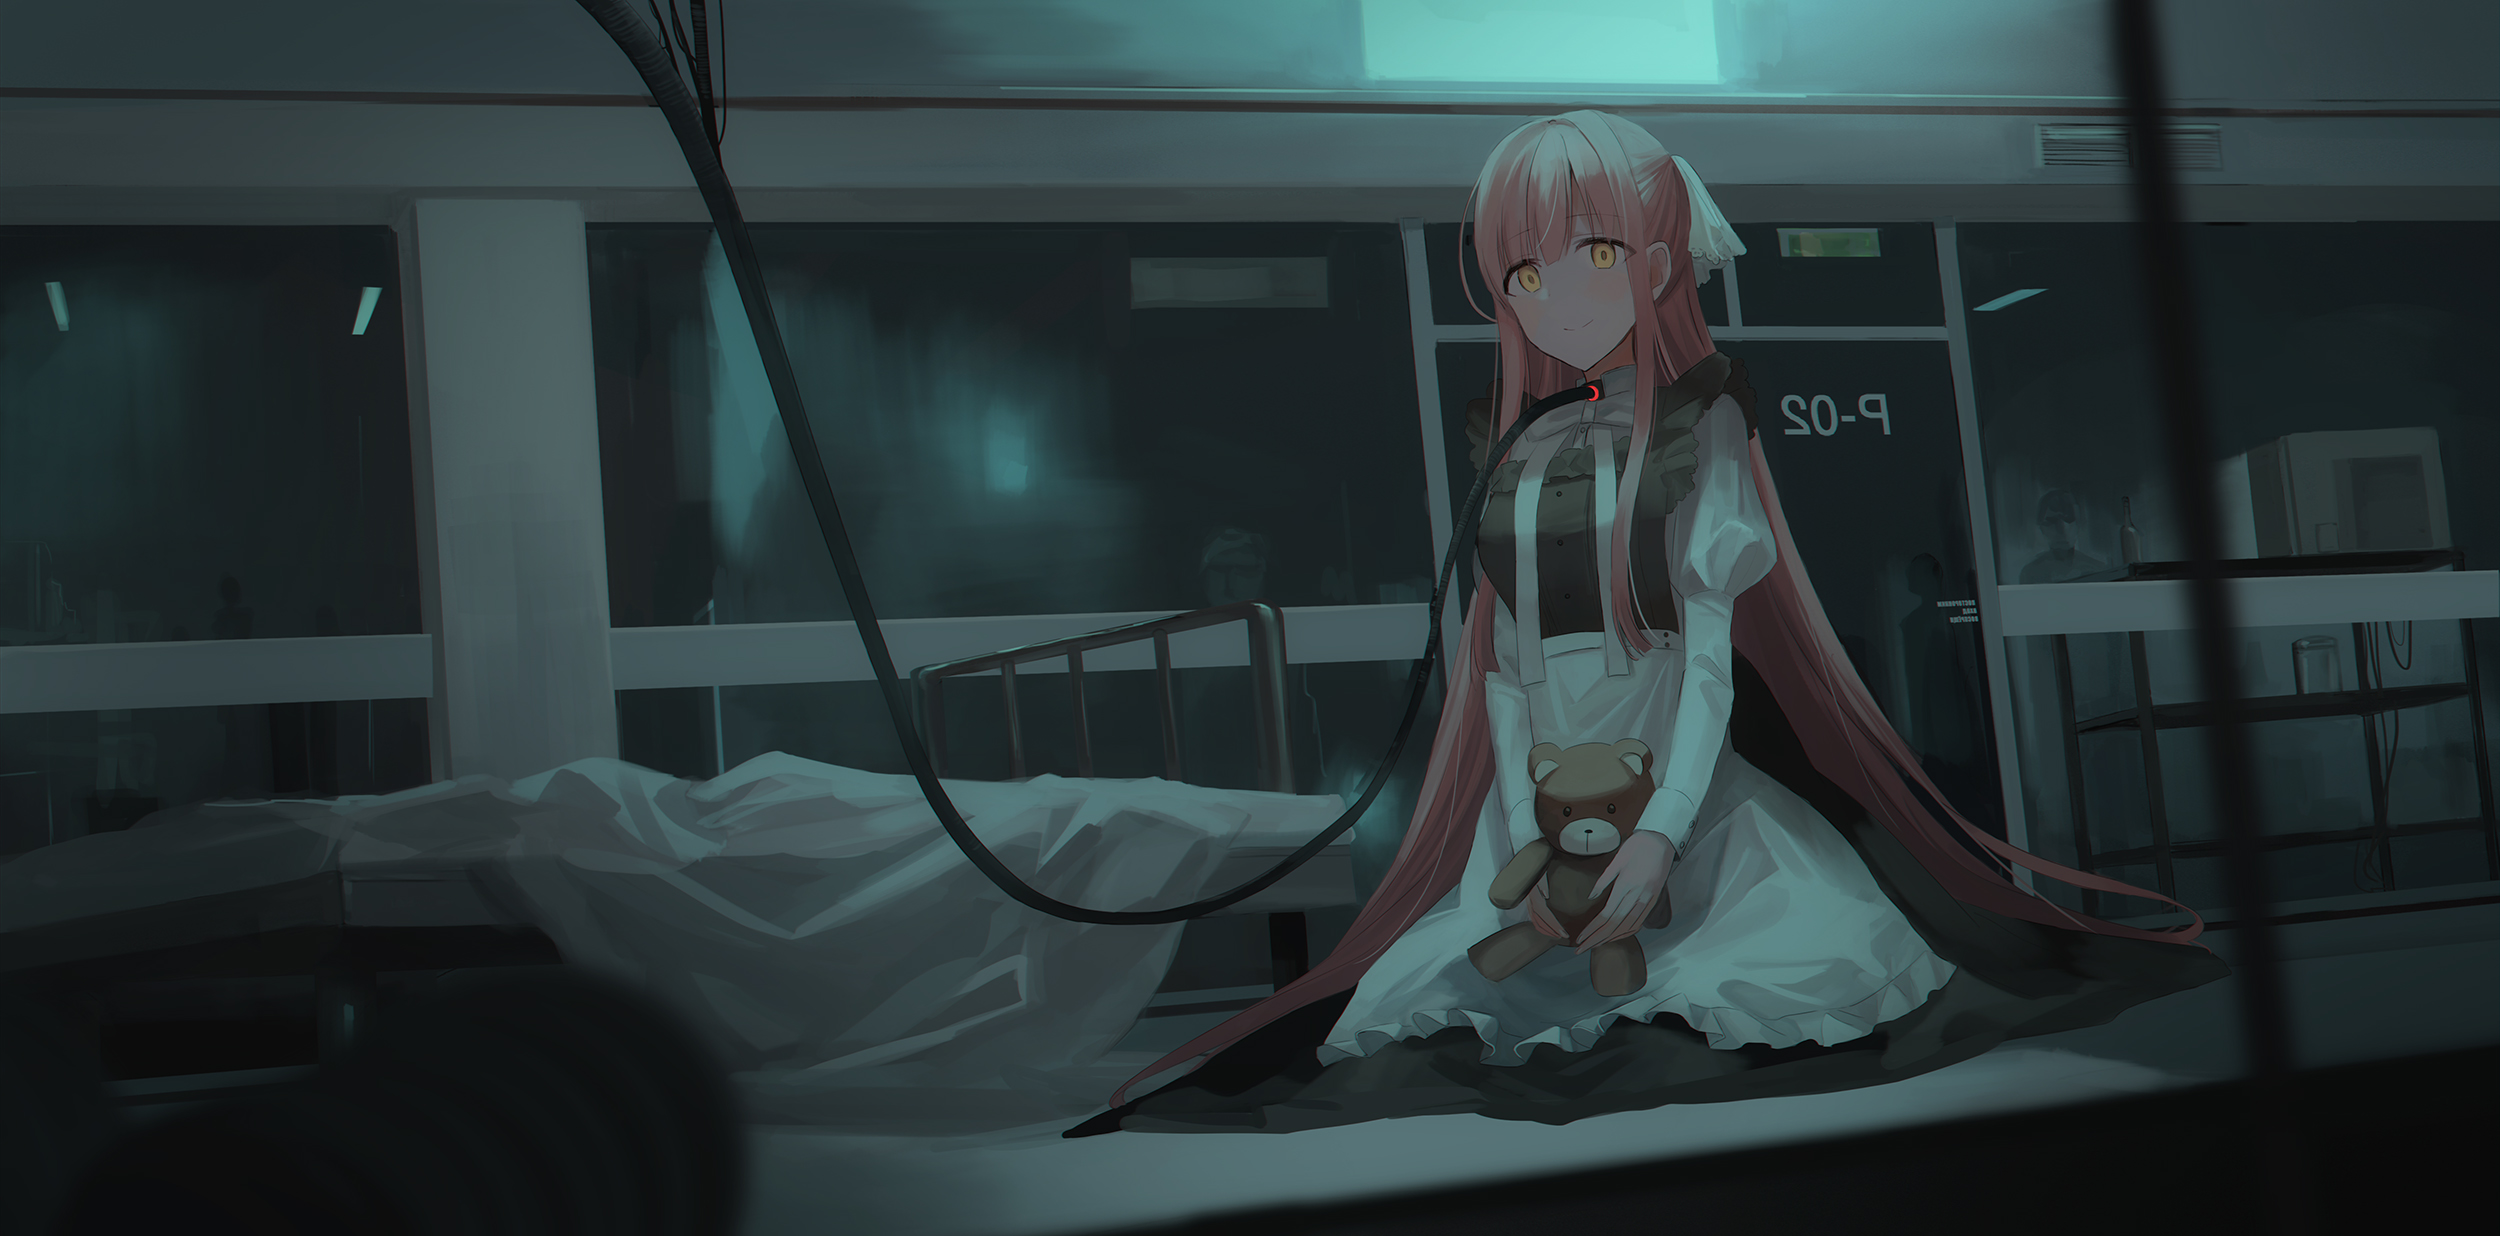 Anime 2500x1236 anime girls original characters pink hair long hair yellow eyes maid dress apron kneeling on the floor bed laboratories experiments science fiction teddy bears artwork digital art drawing illustration 2D Chihuri 45